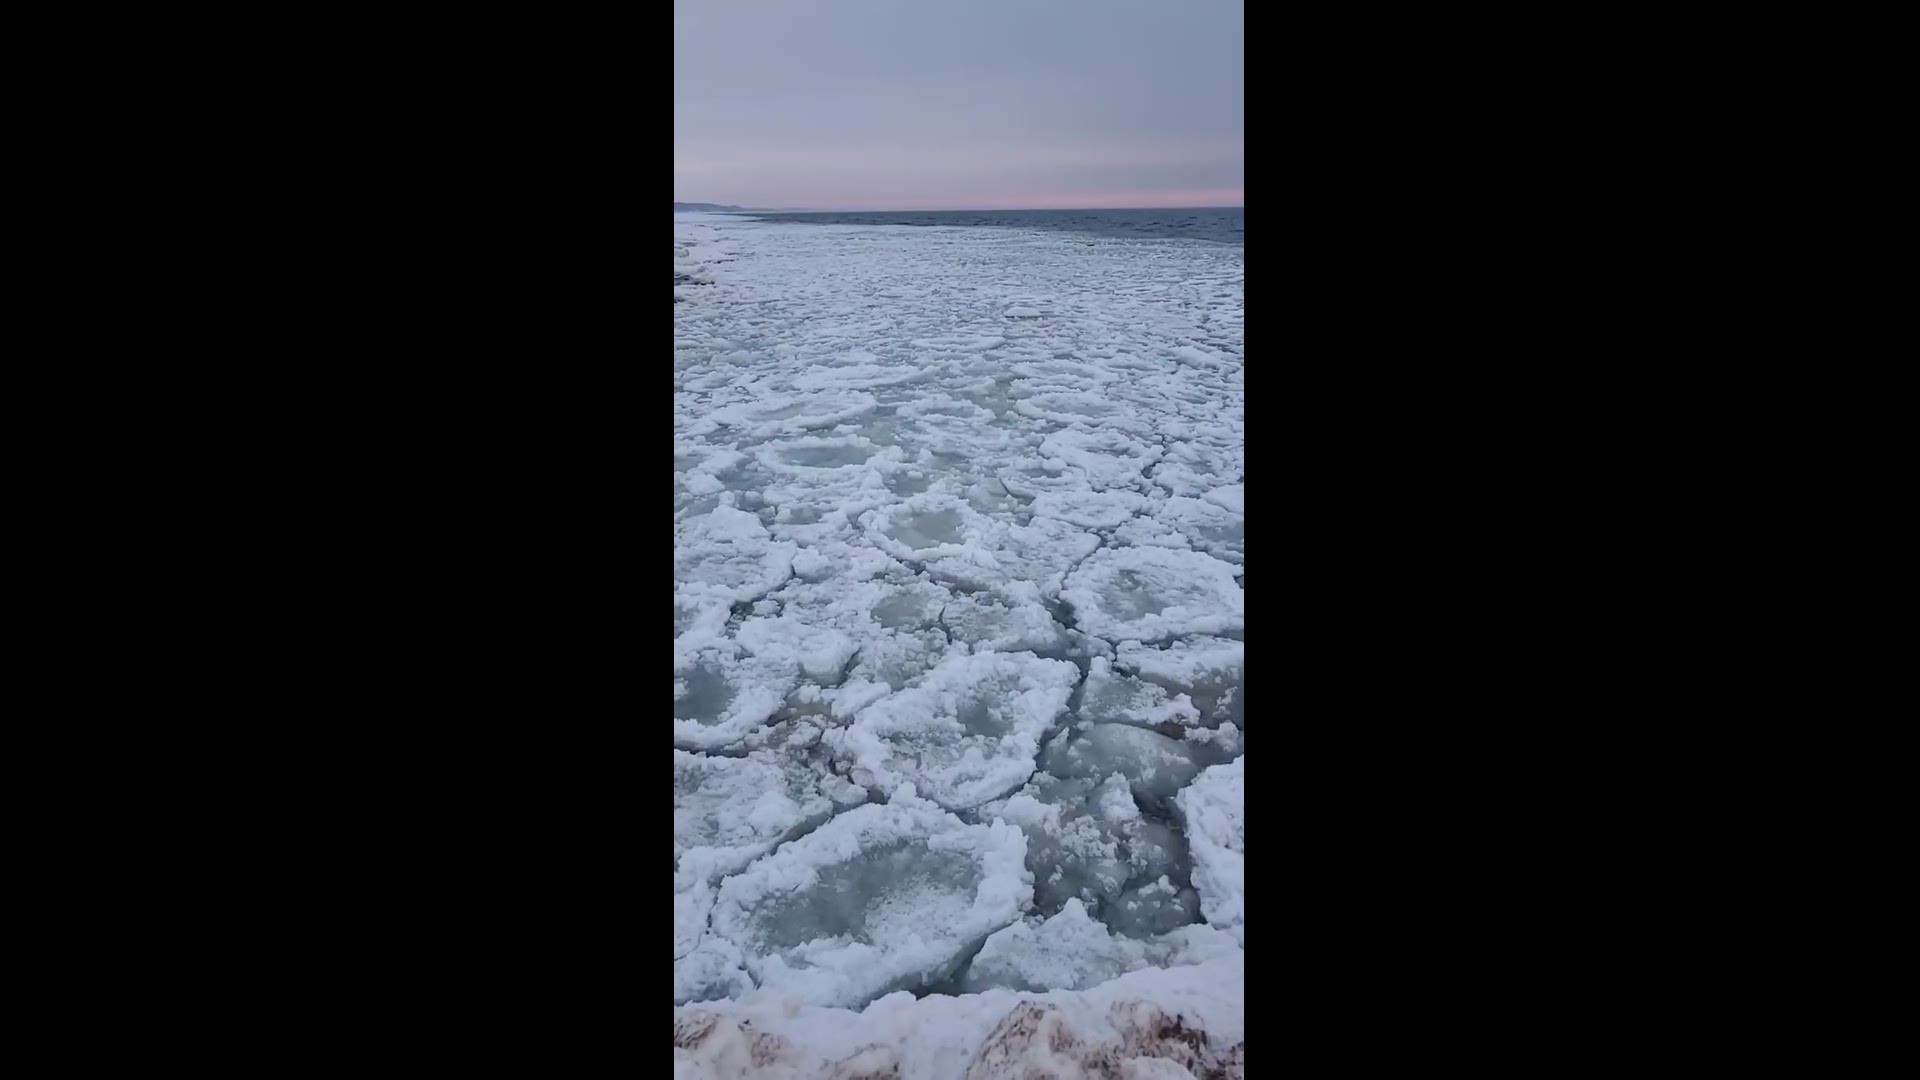 Watching ice donuts at Grand haven is so satisfying!
Credit: Tara Olen